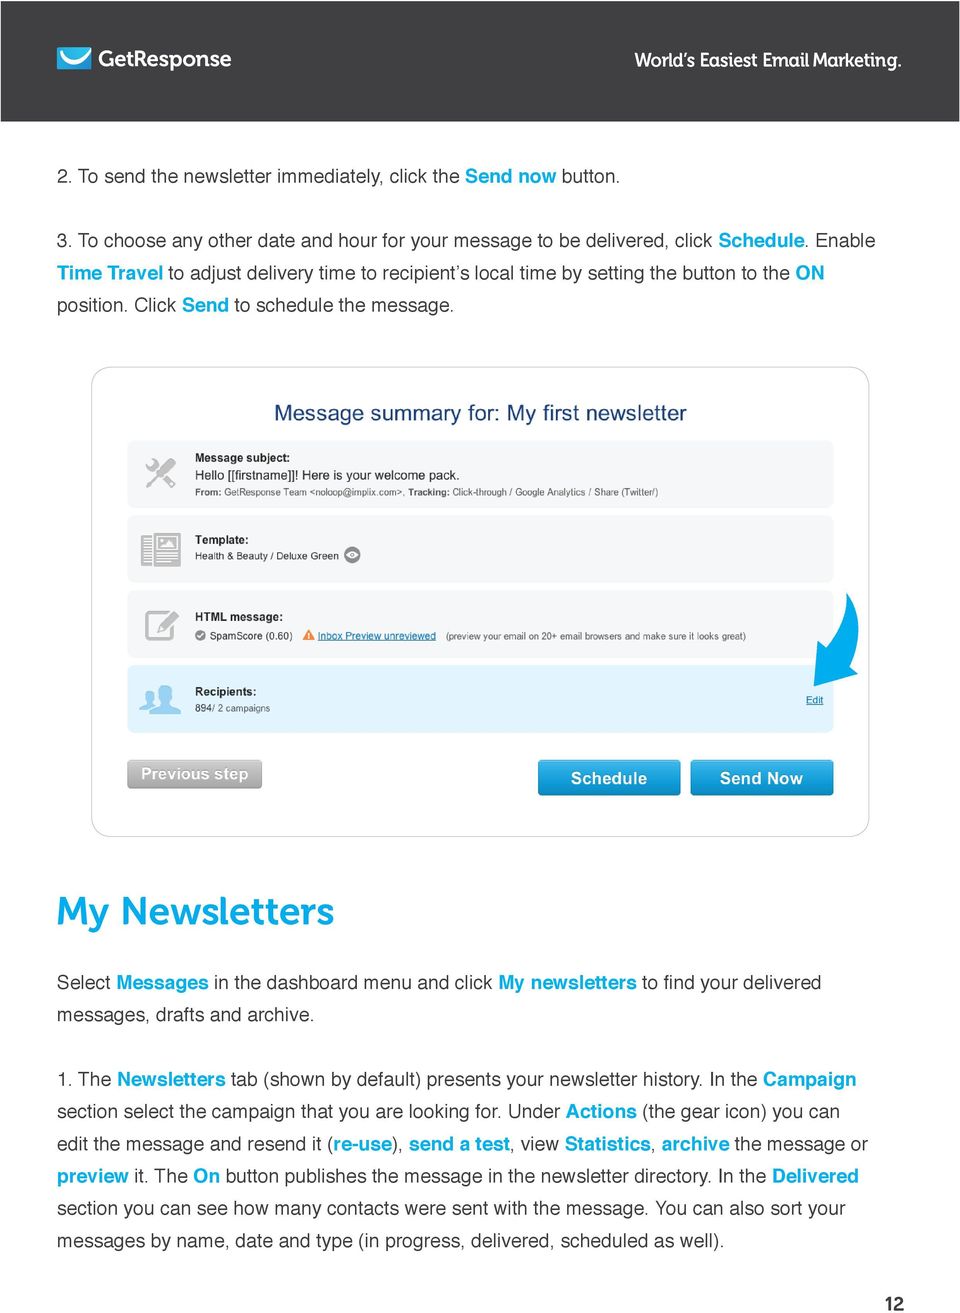 The Newsletters tab (shown by default) presents your newsletter history.